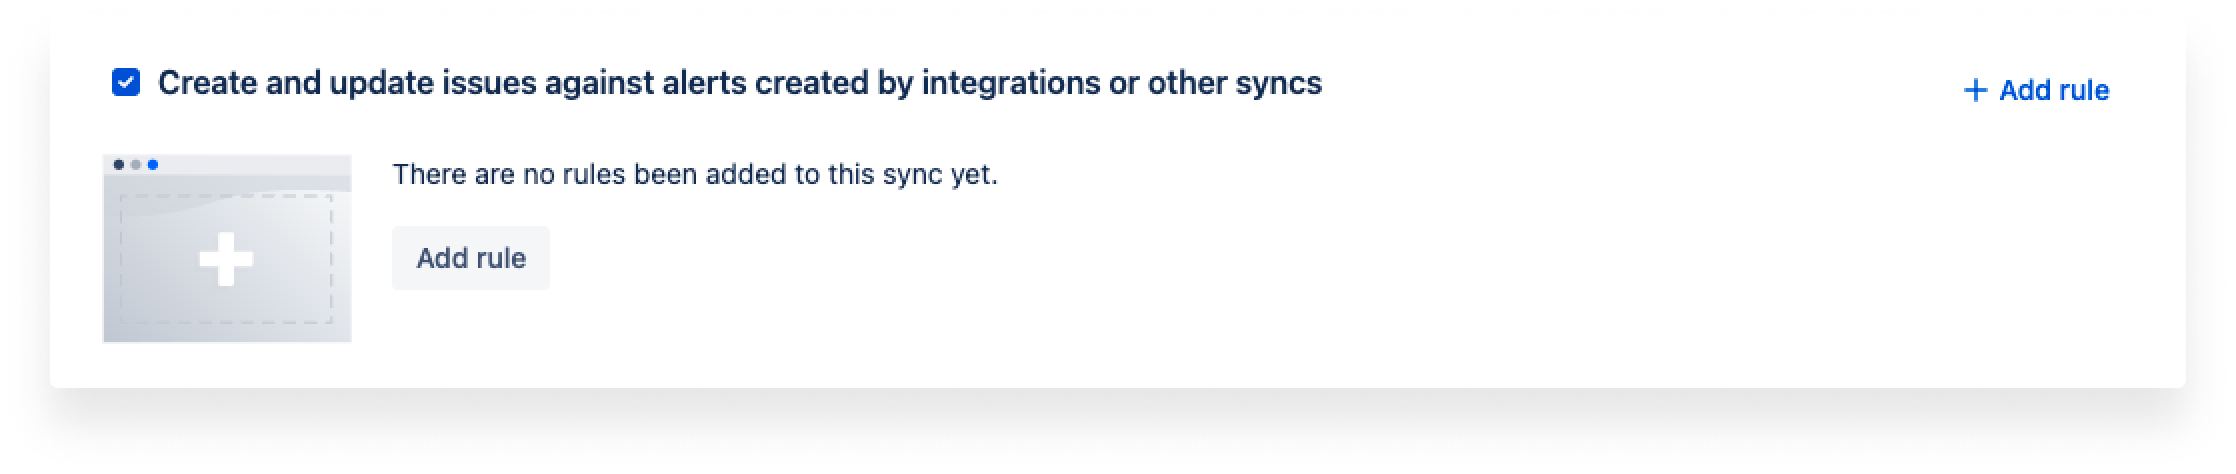 Add rule to create and update issues in Sync